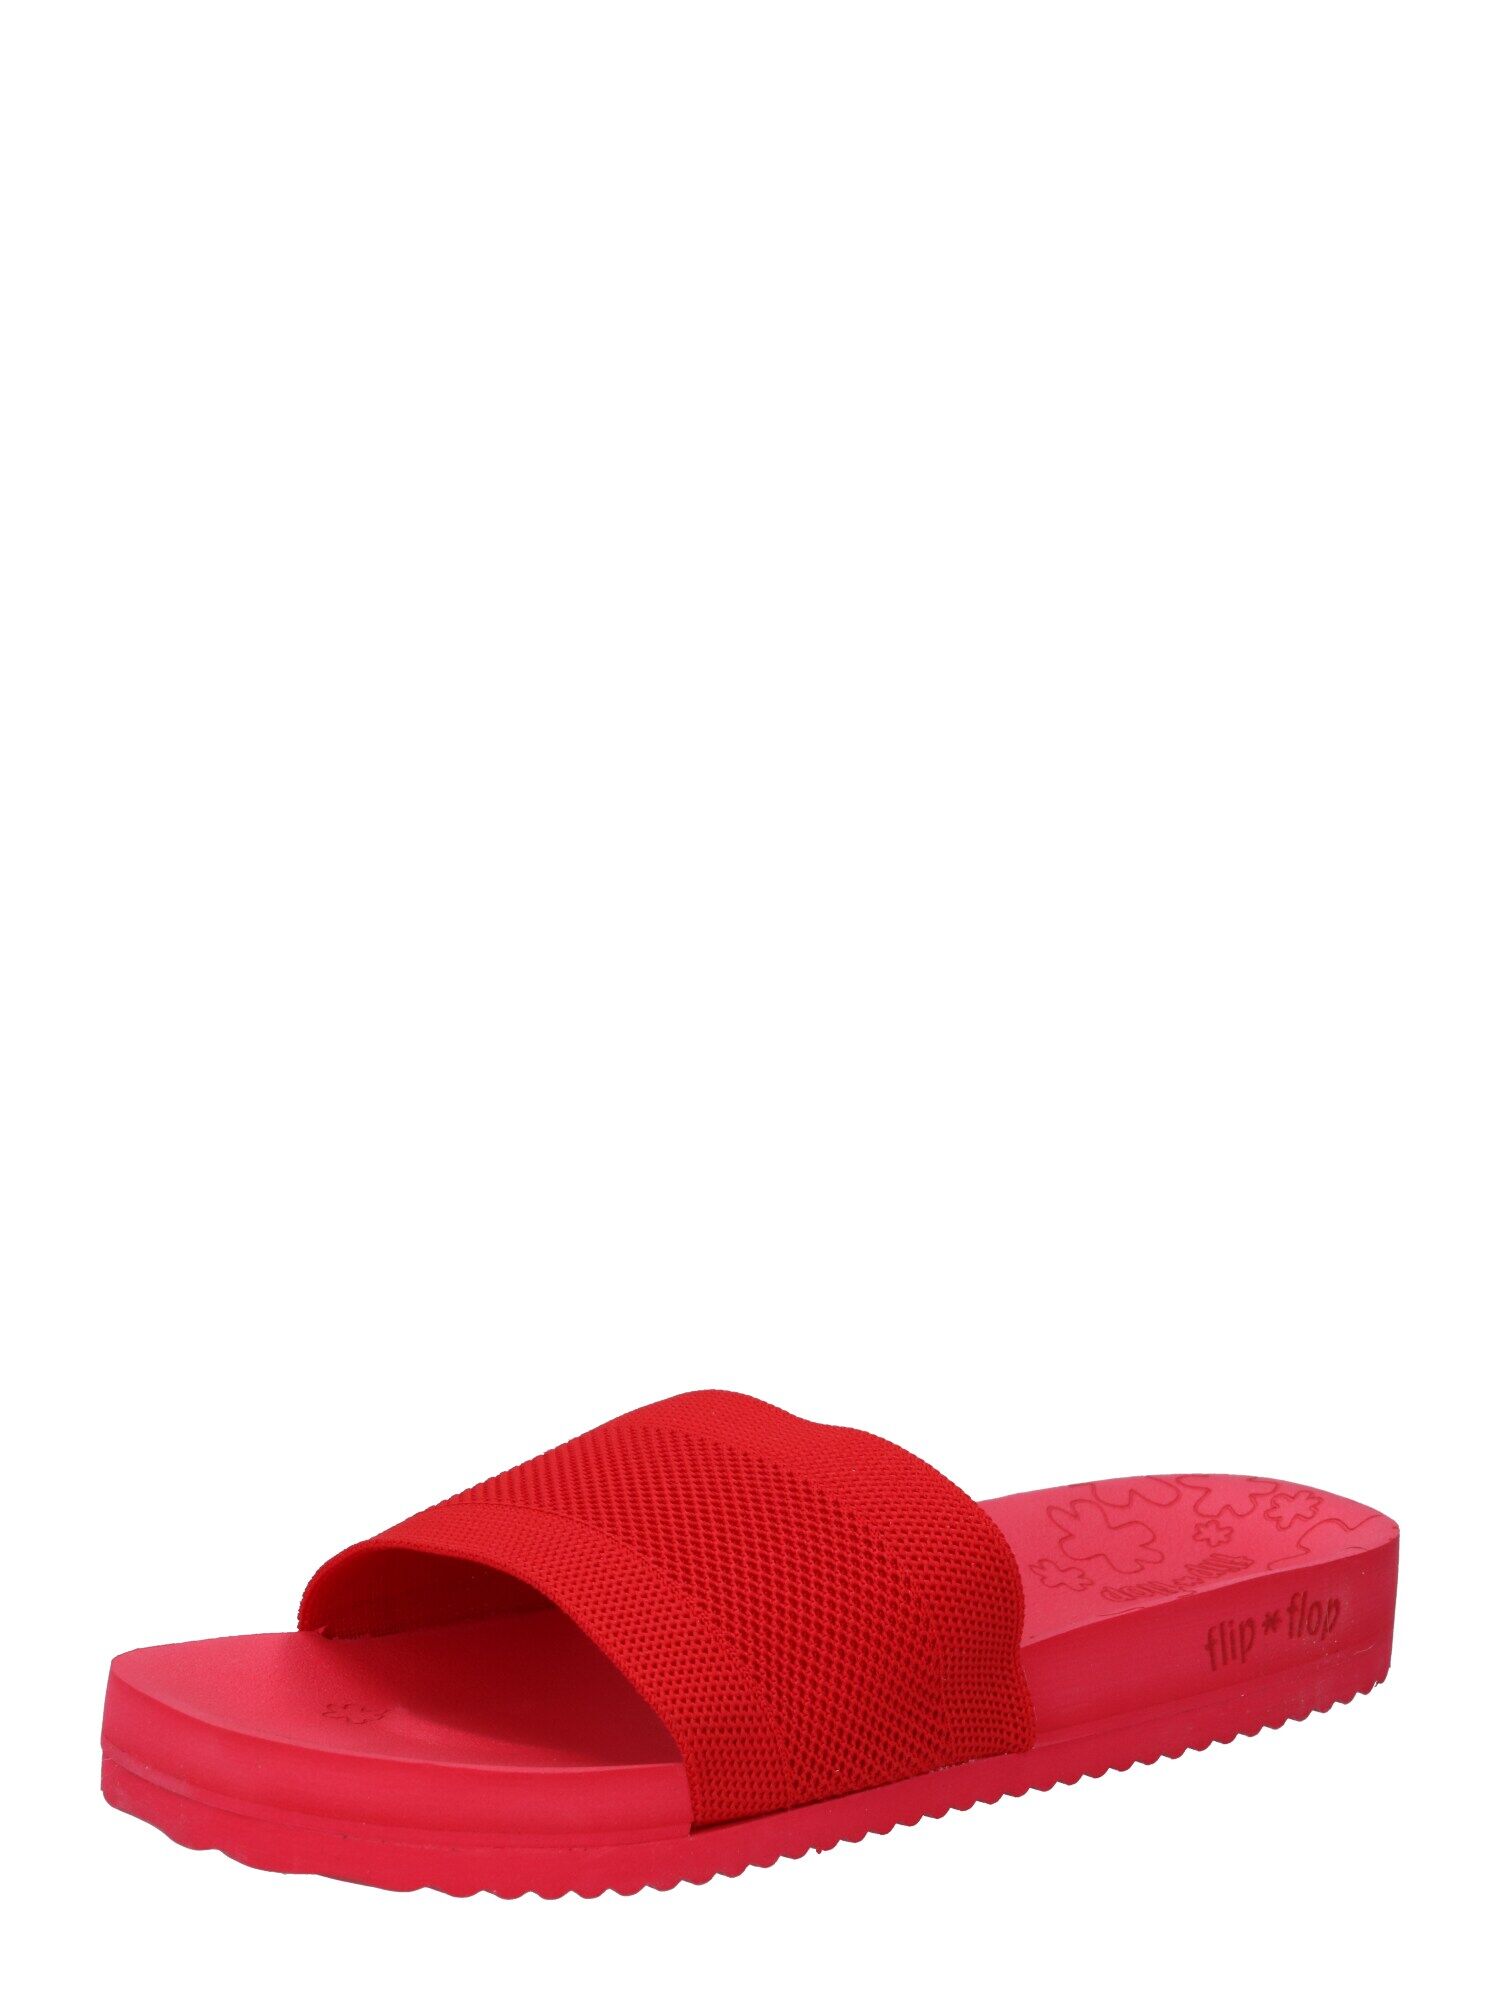 FLIP*FLOP Zoccoletto 'Pool' Rosso